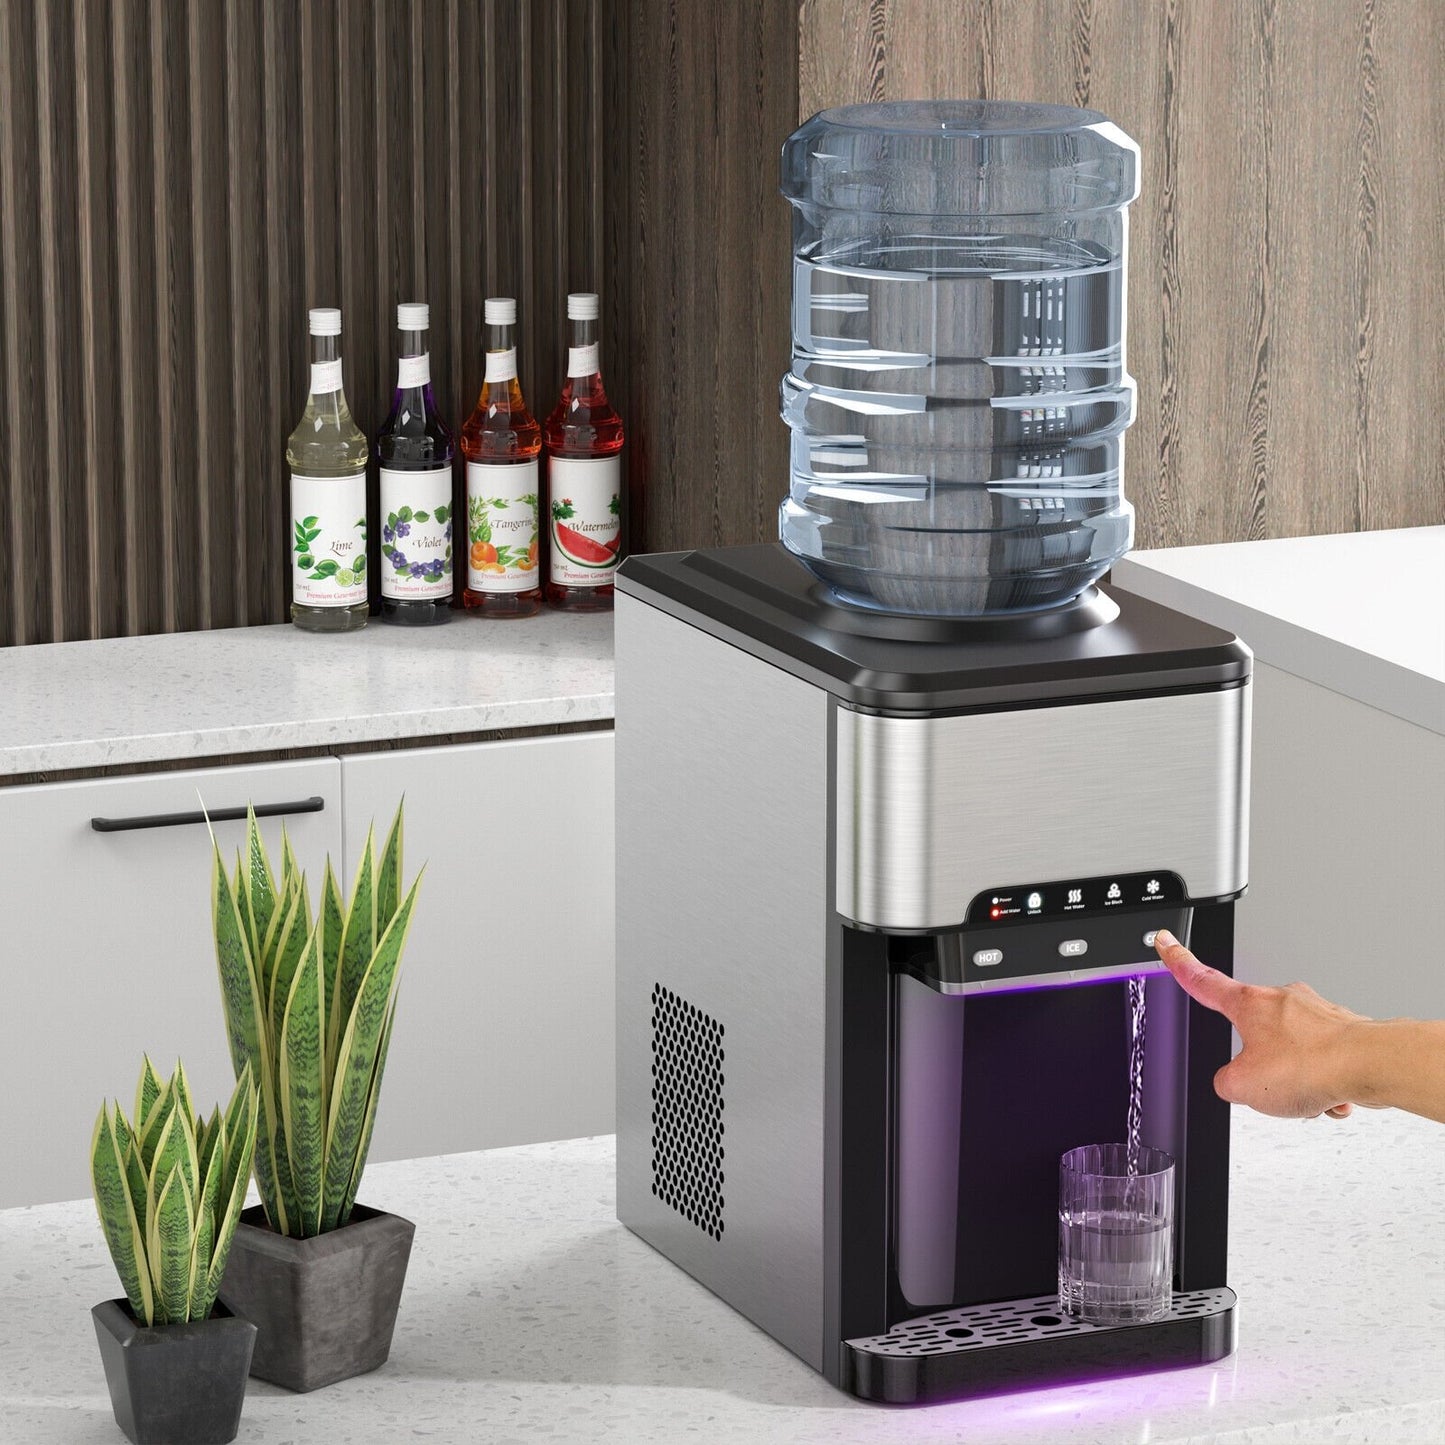 3-in-1 Water Cooler Dispenser with Built-in Ice Maker and 3 Temperature Settings, Silver at Gallery Canada